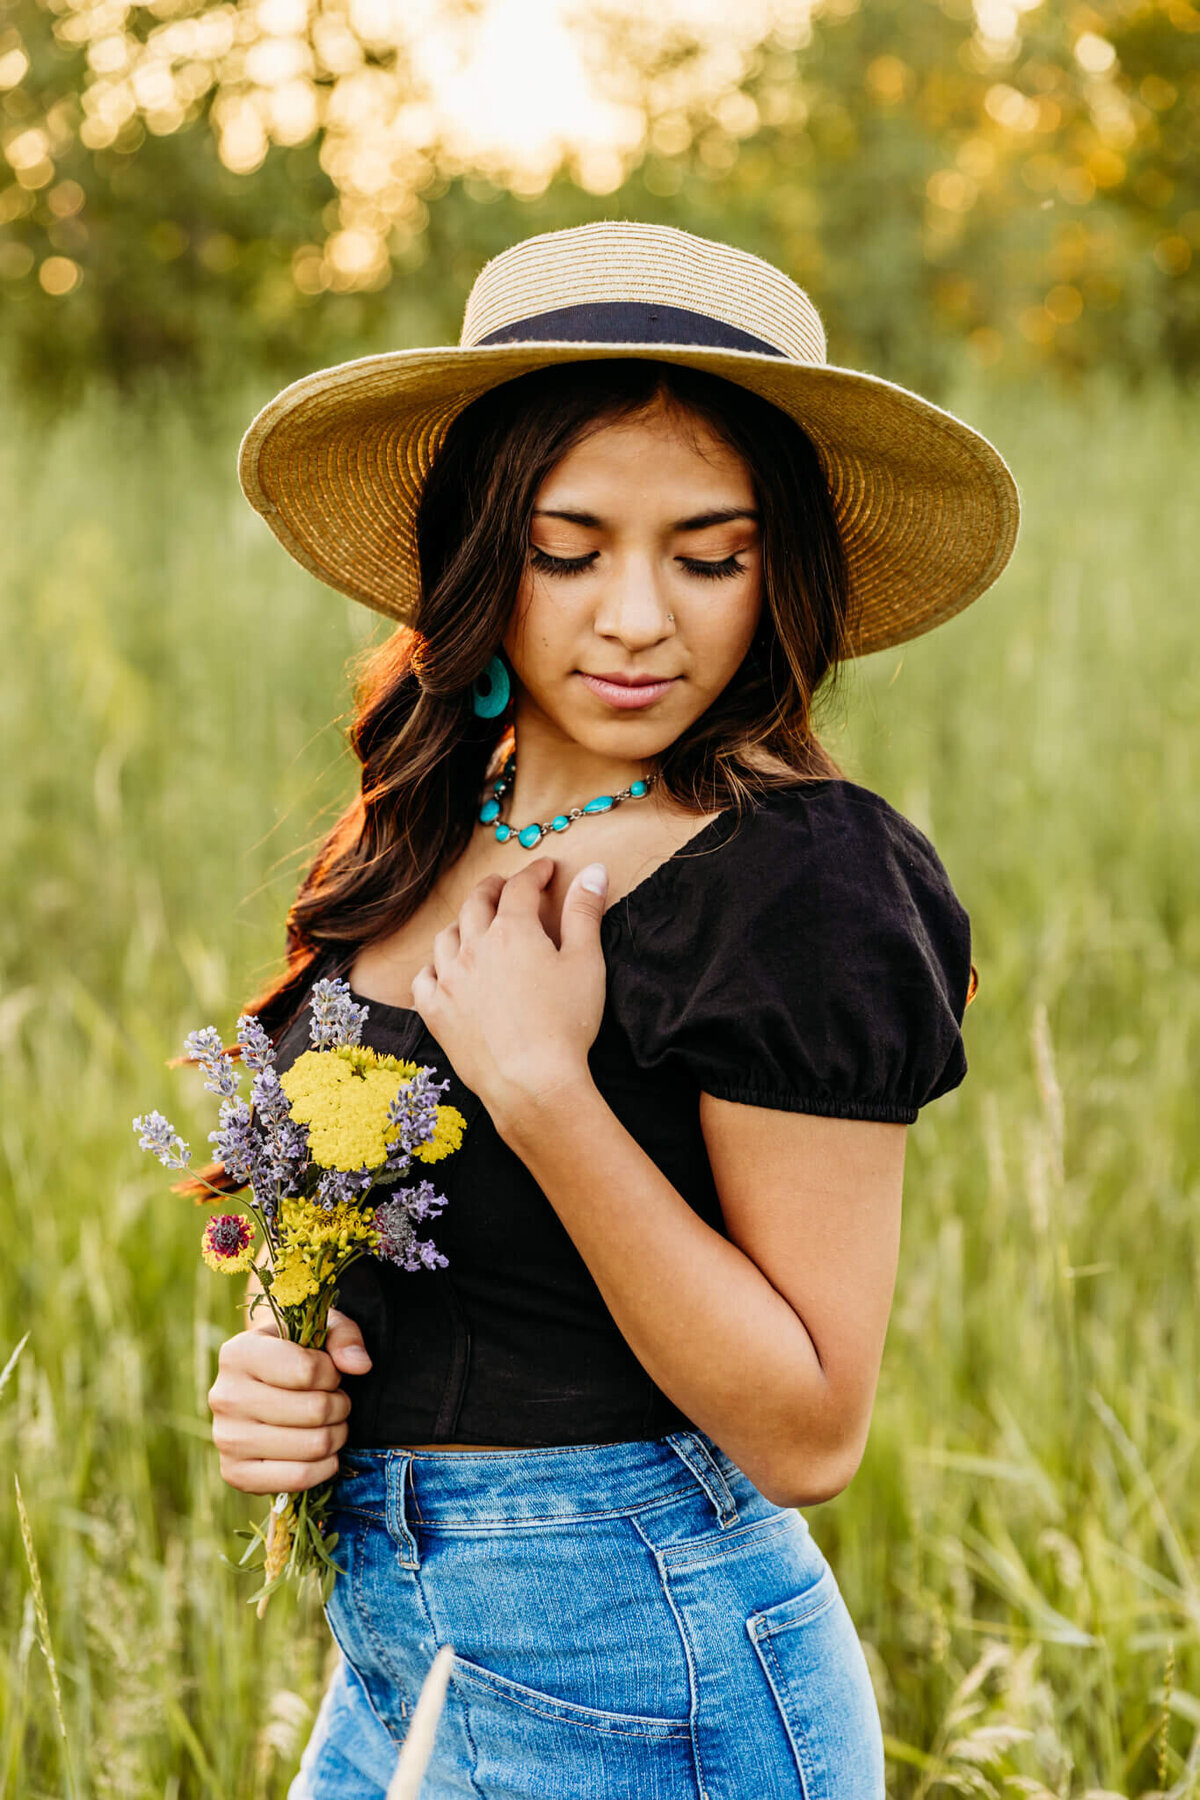 stunning high school senior wearing a sunhat and holding a bouquet of flowers, captured by Green Bay Senior Photographer Ashley Kalbus